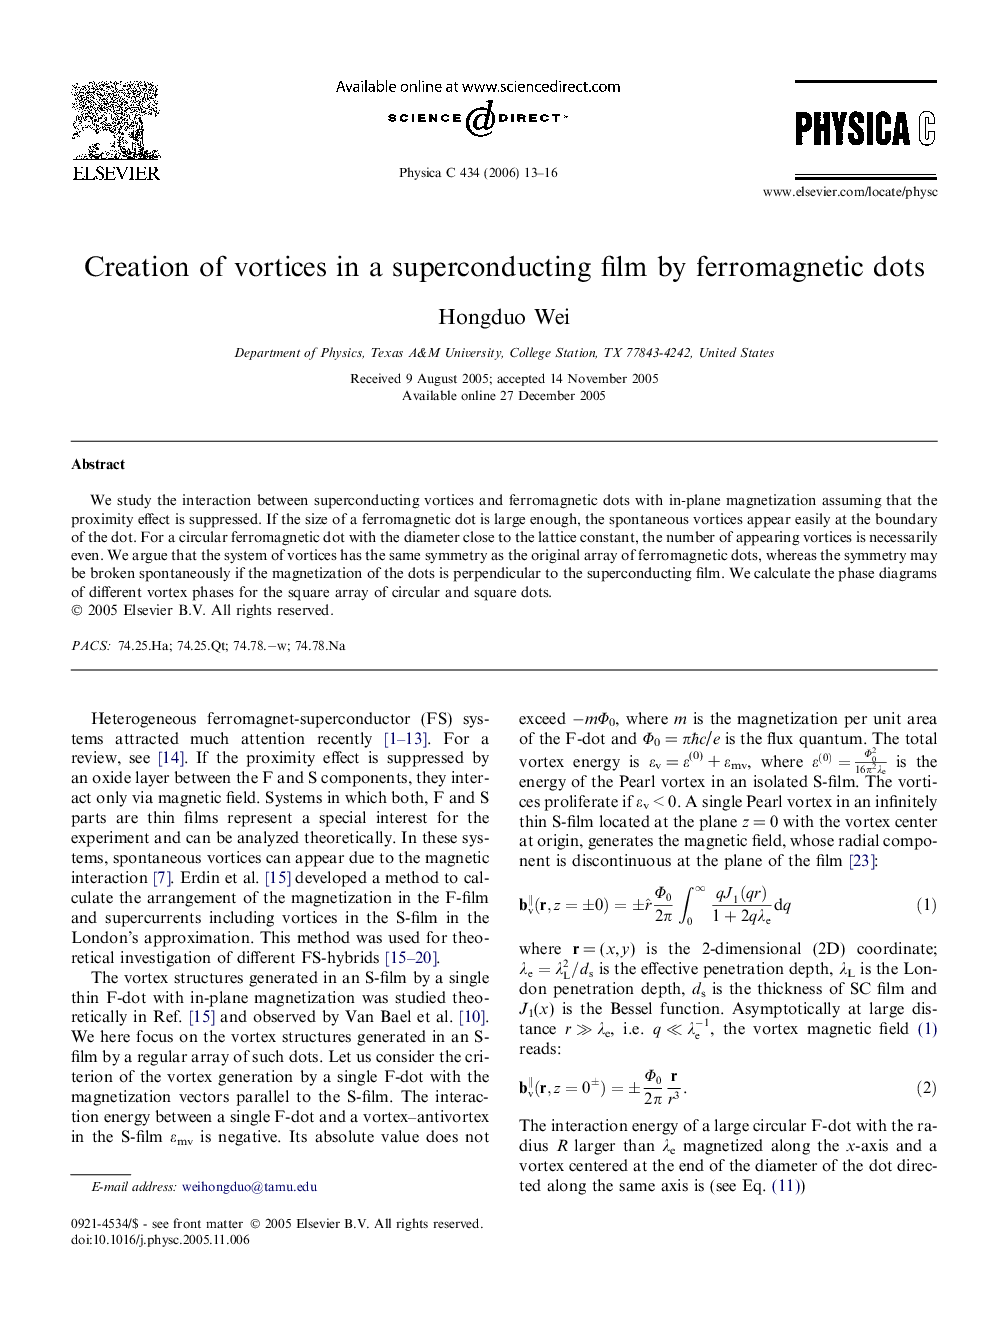 Creation of vortices in a superconducting film by ferromagnetic dots